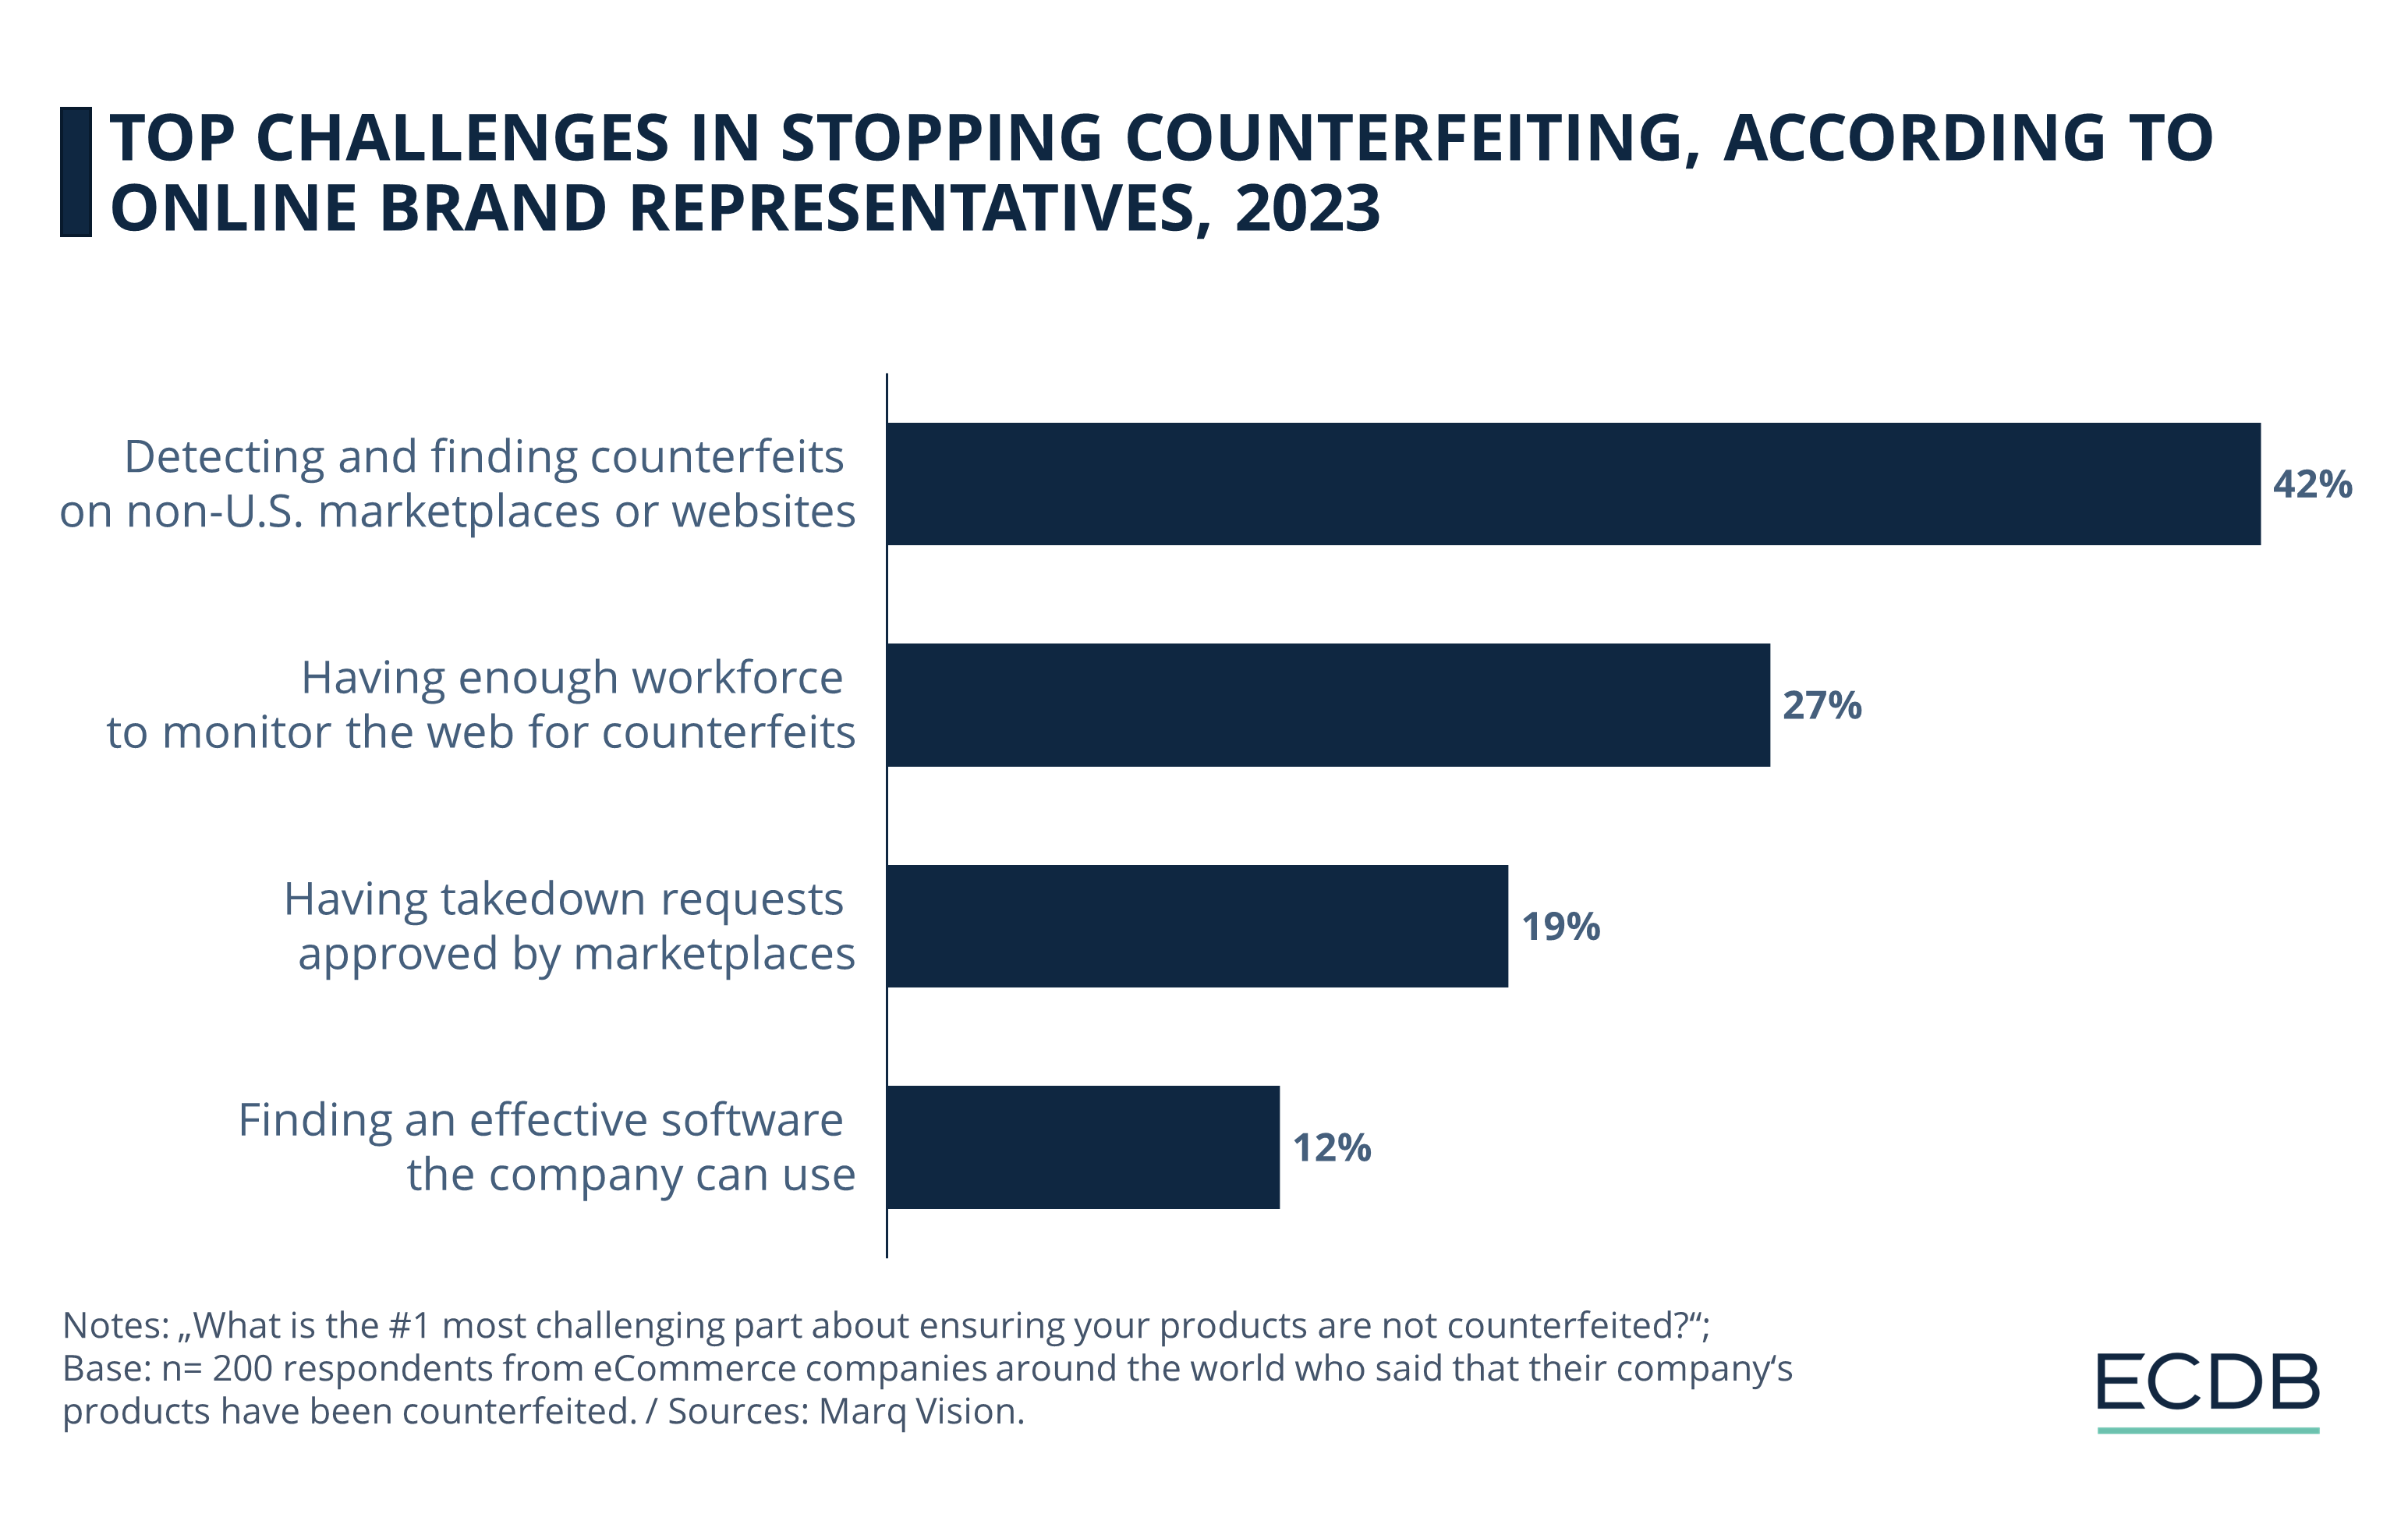 Top Challenges in Stopping Counterfeiting, According to Online Brand Representatives, 2023